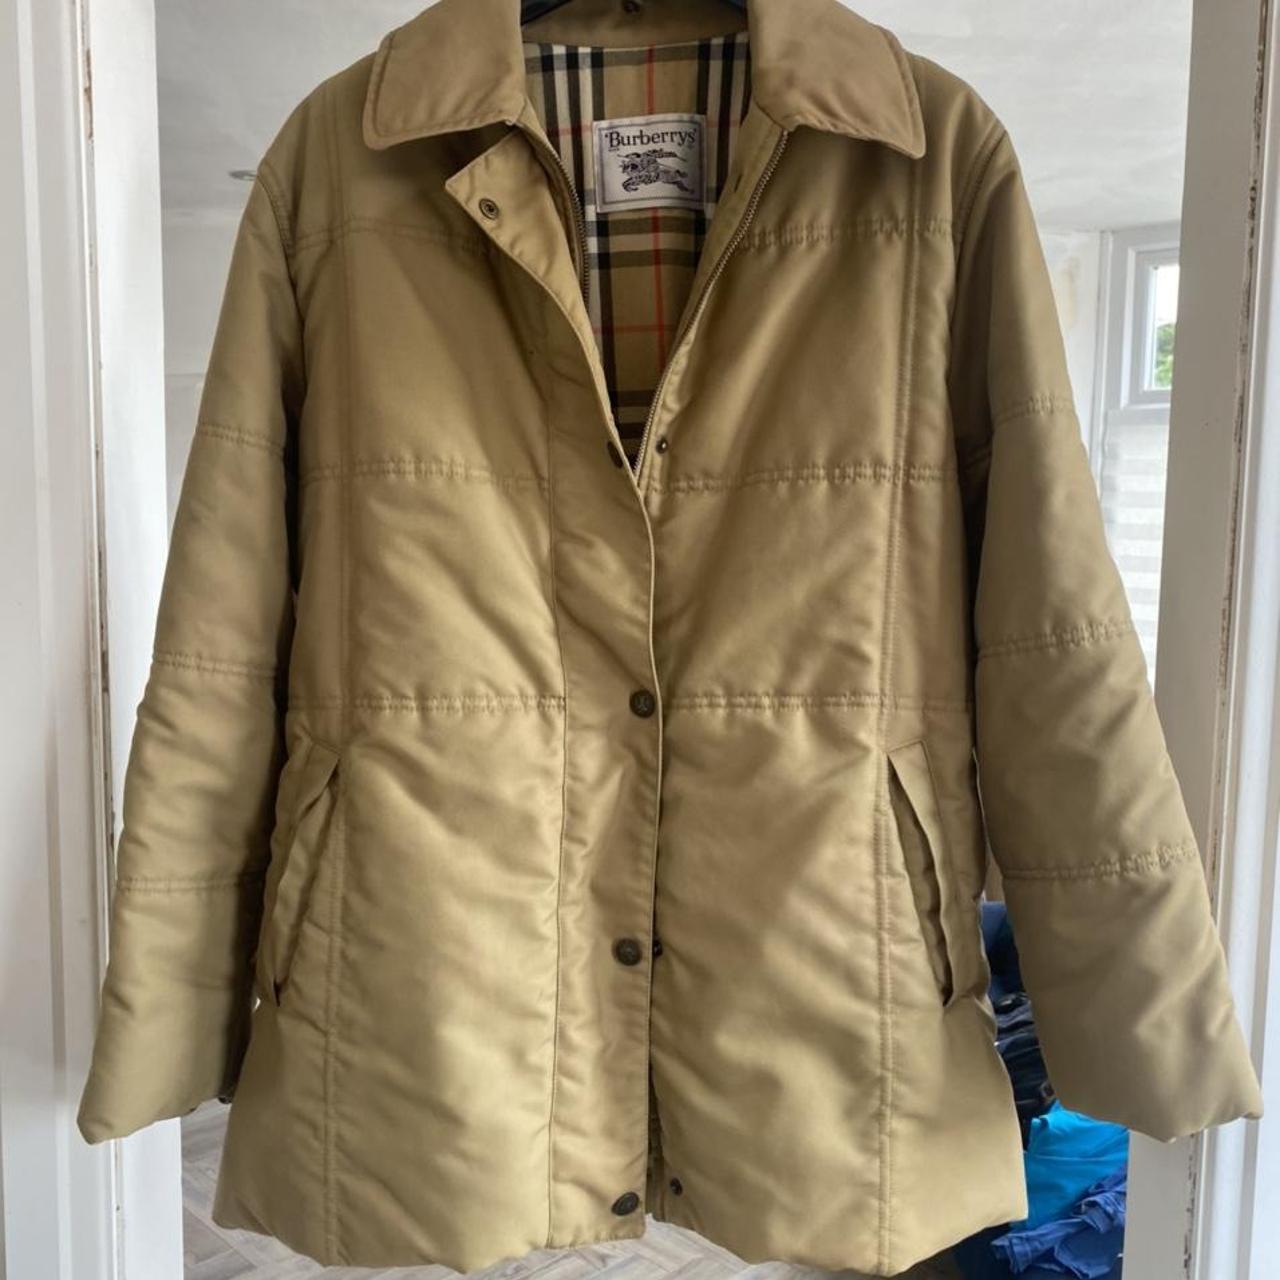 Burberry jacket. Barely worn. Size large. Any... - Depop